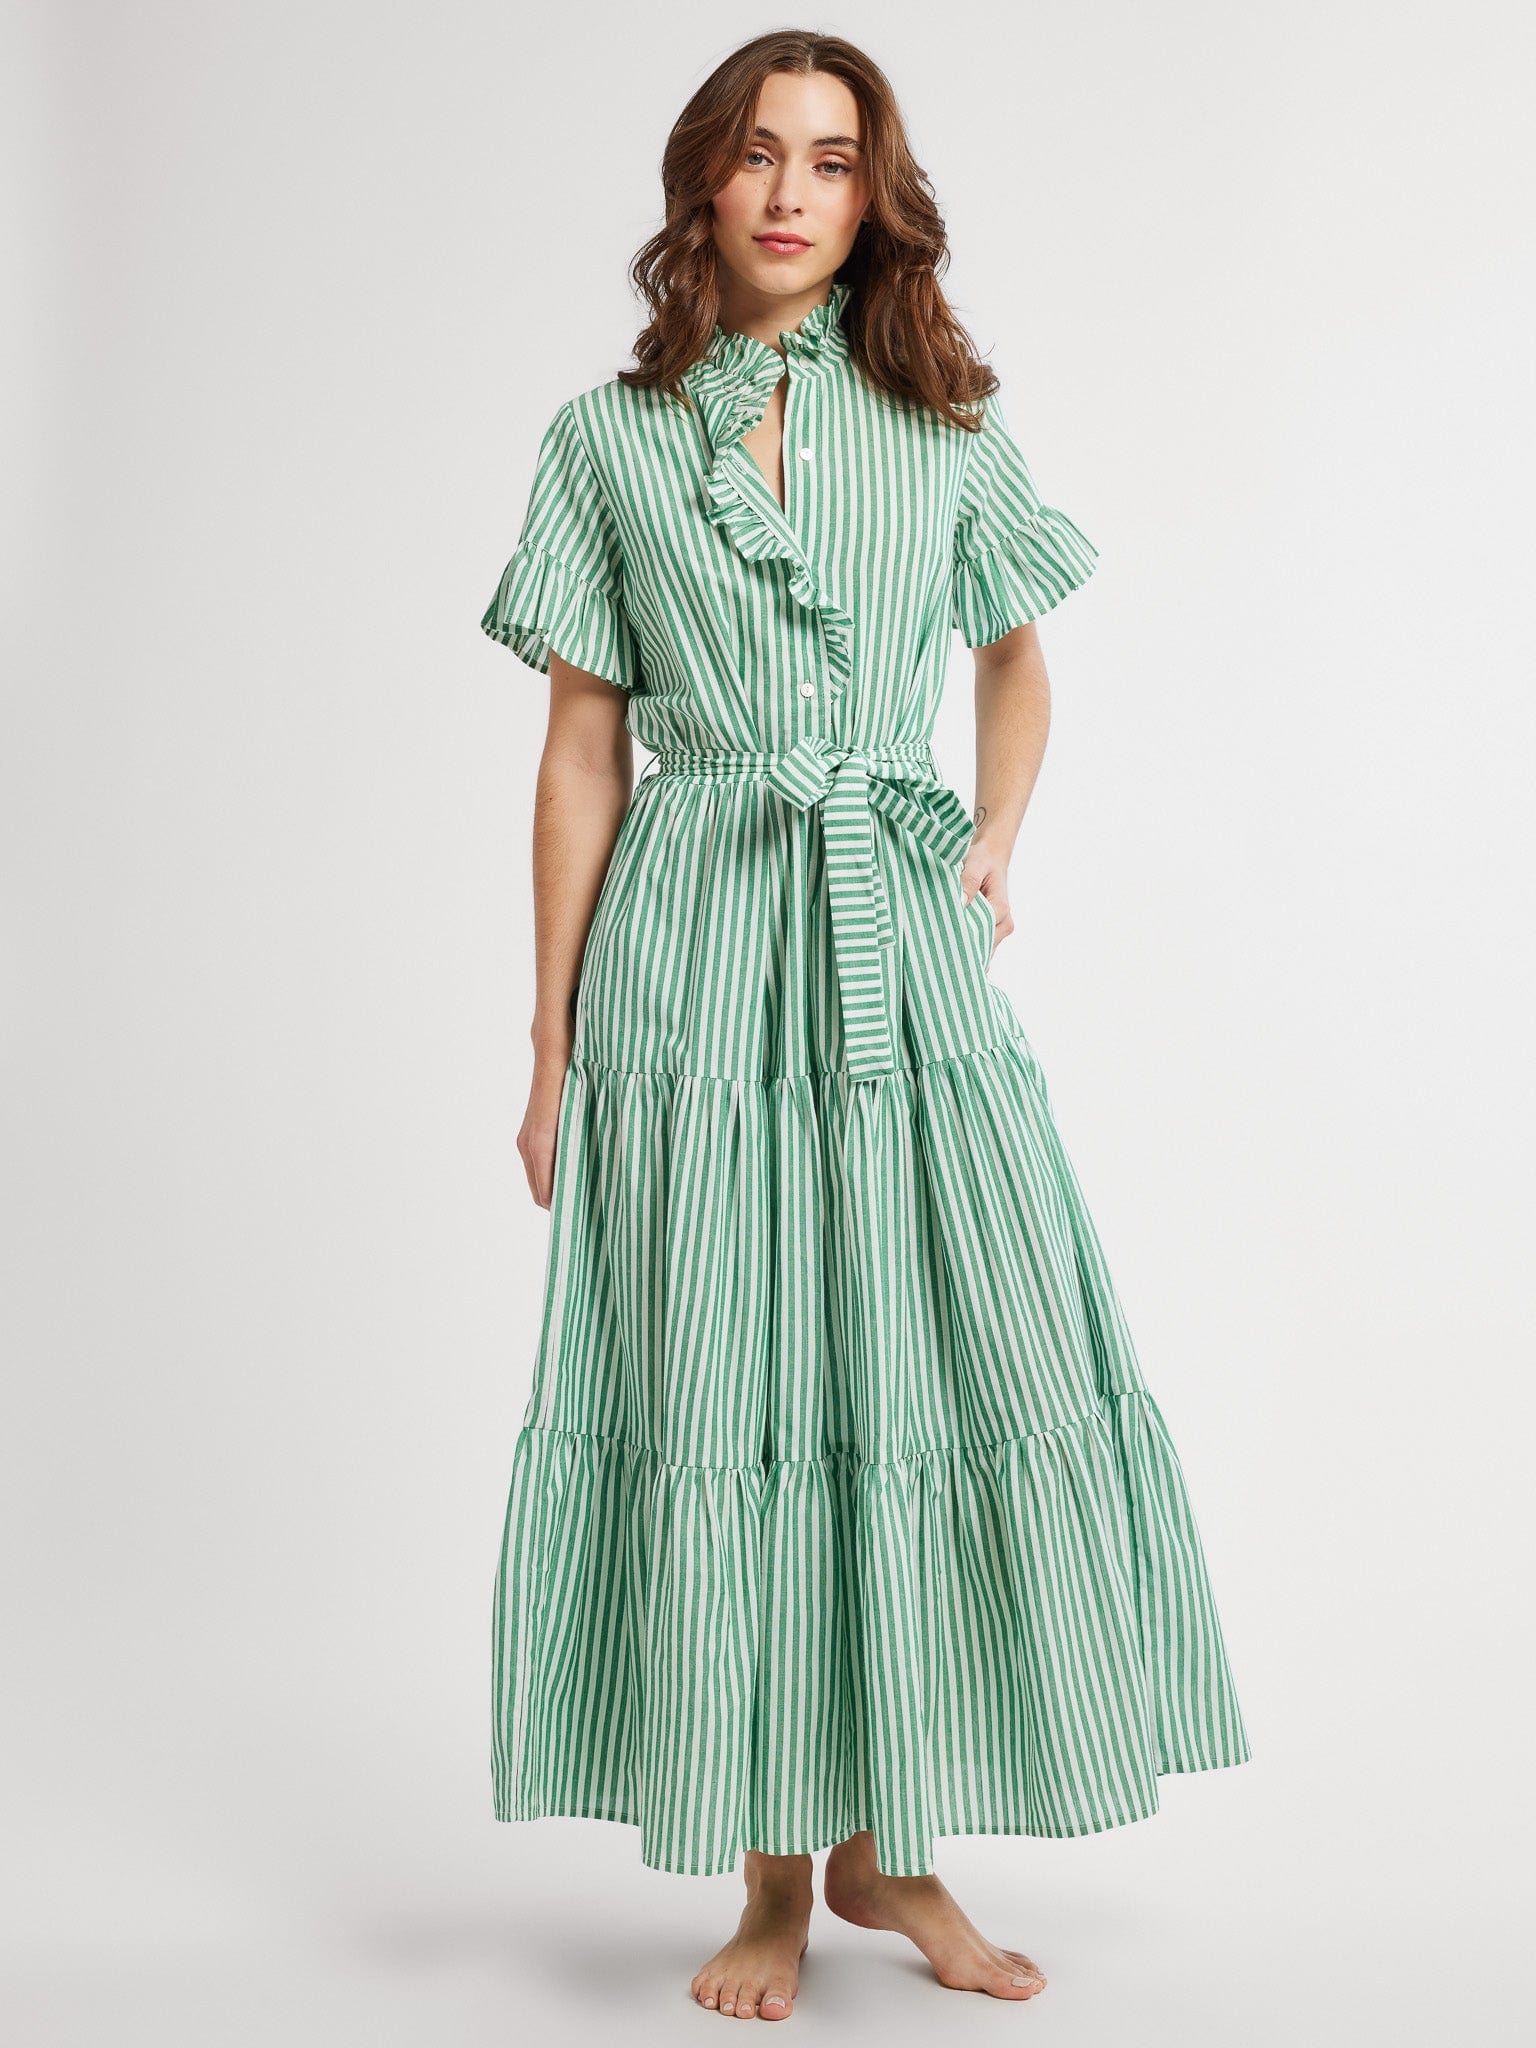 MILLE Clothing Victoria Dress in Kelly Stripe